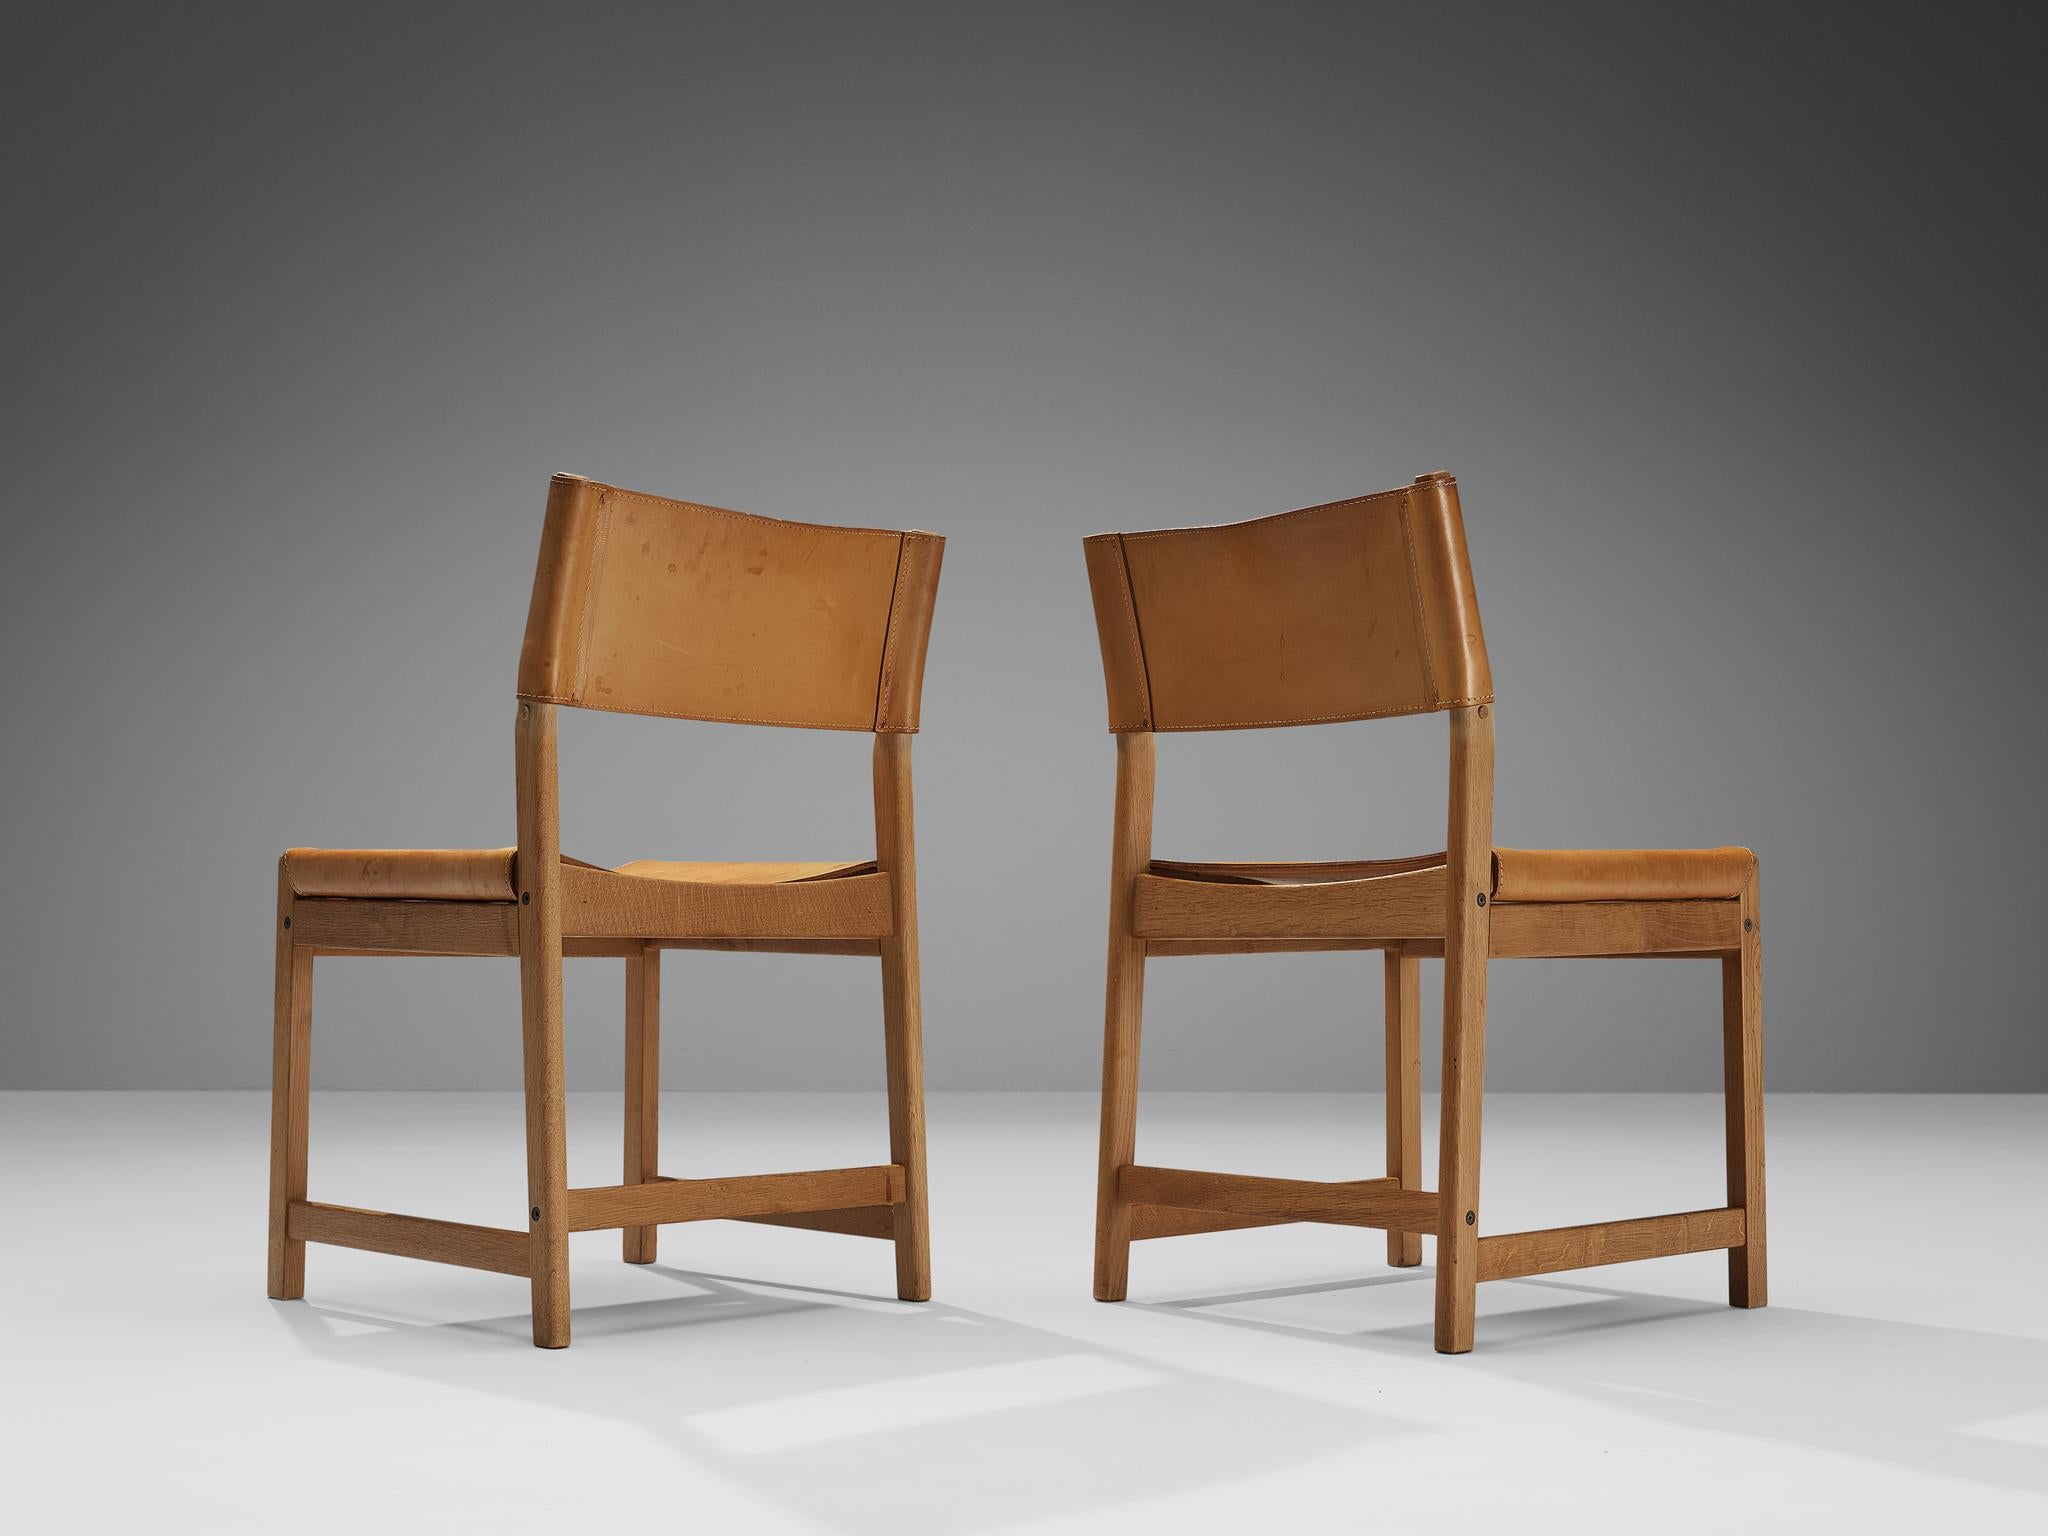 Kurt Østervig for Sibast, pair of dining chairs, cognac leather, oak, Denmark, 1960s. 

These characteristic chairs are made in solid oak, with seating and back from thick cognac leather. The lines and forms are simple, yet with the right amount of